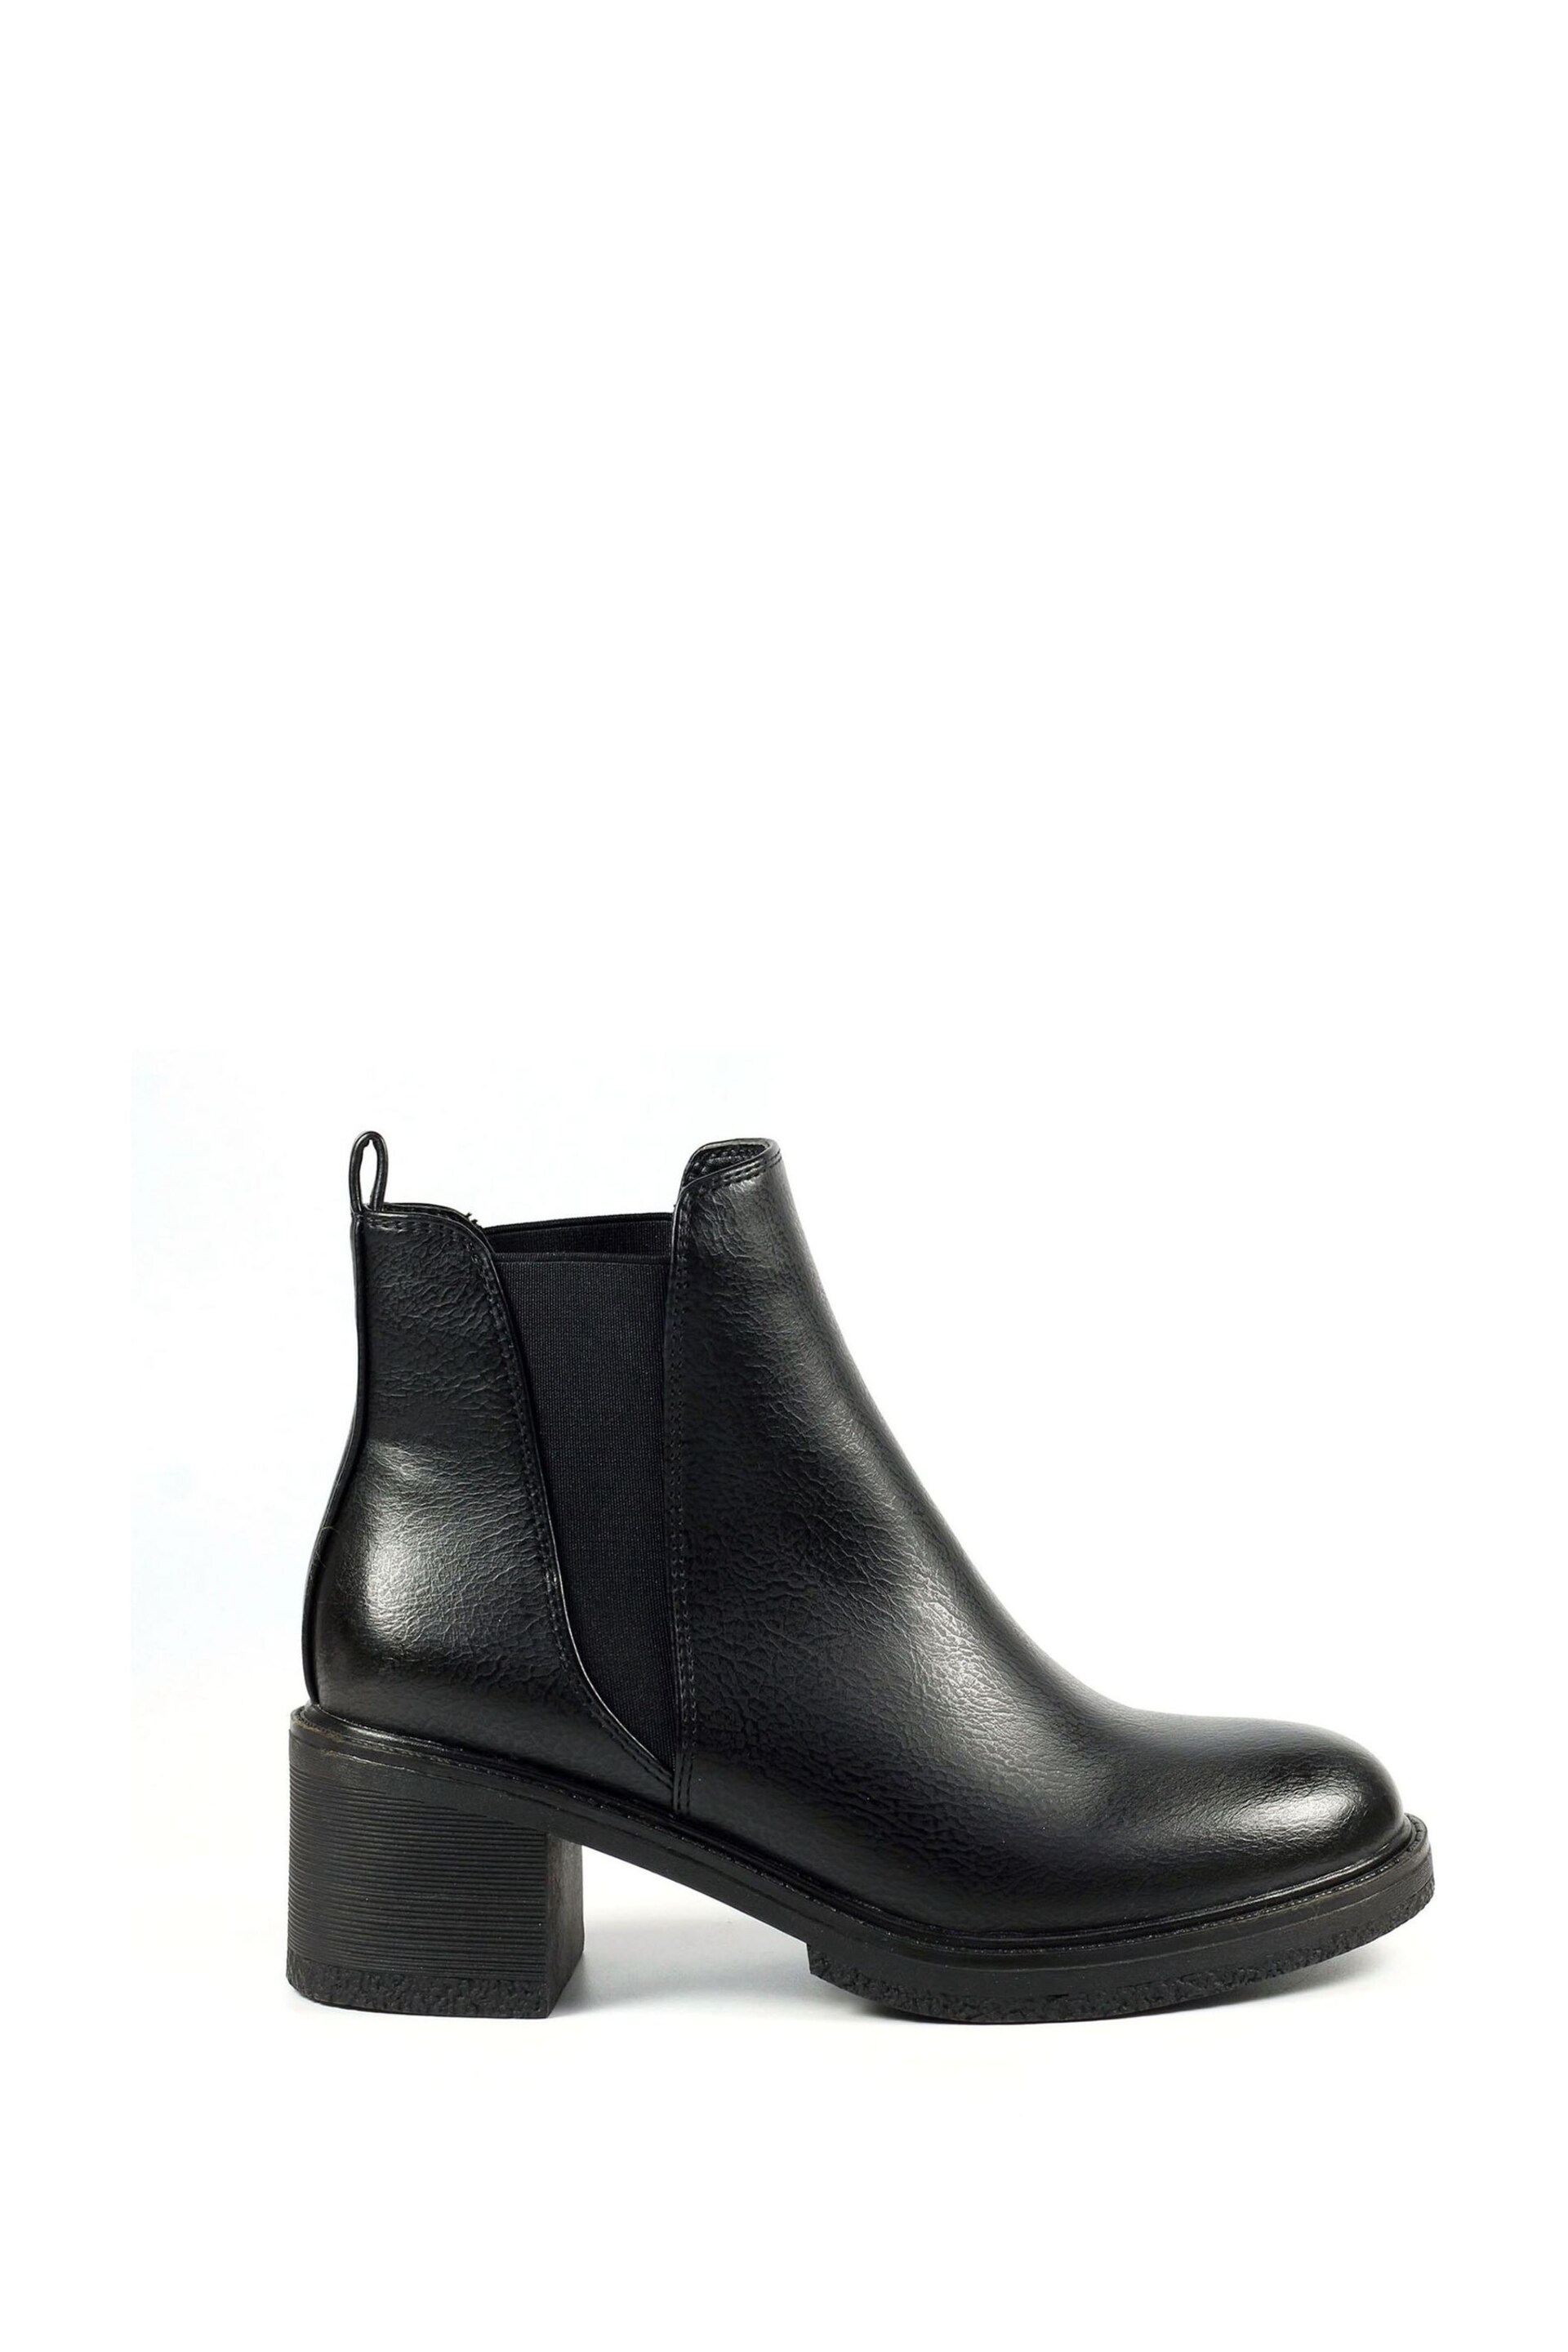 Lunar Ophelia Block Heel Ankle Boots - Image 2 of 9